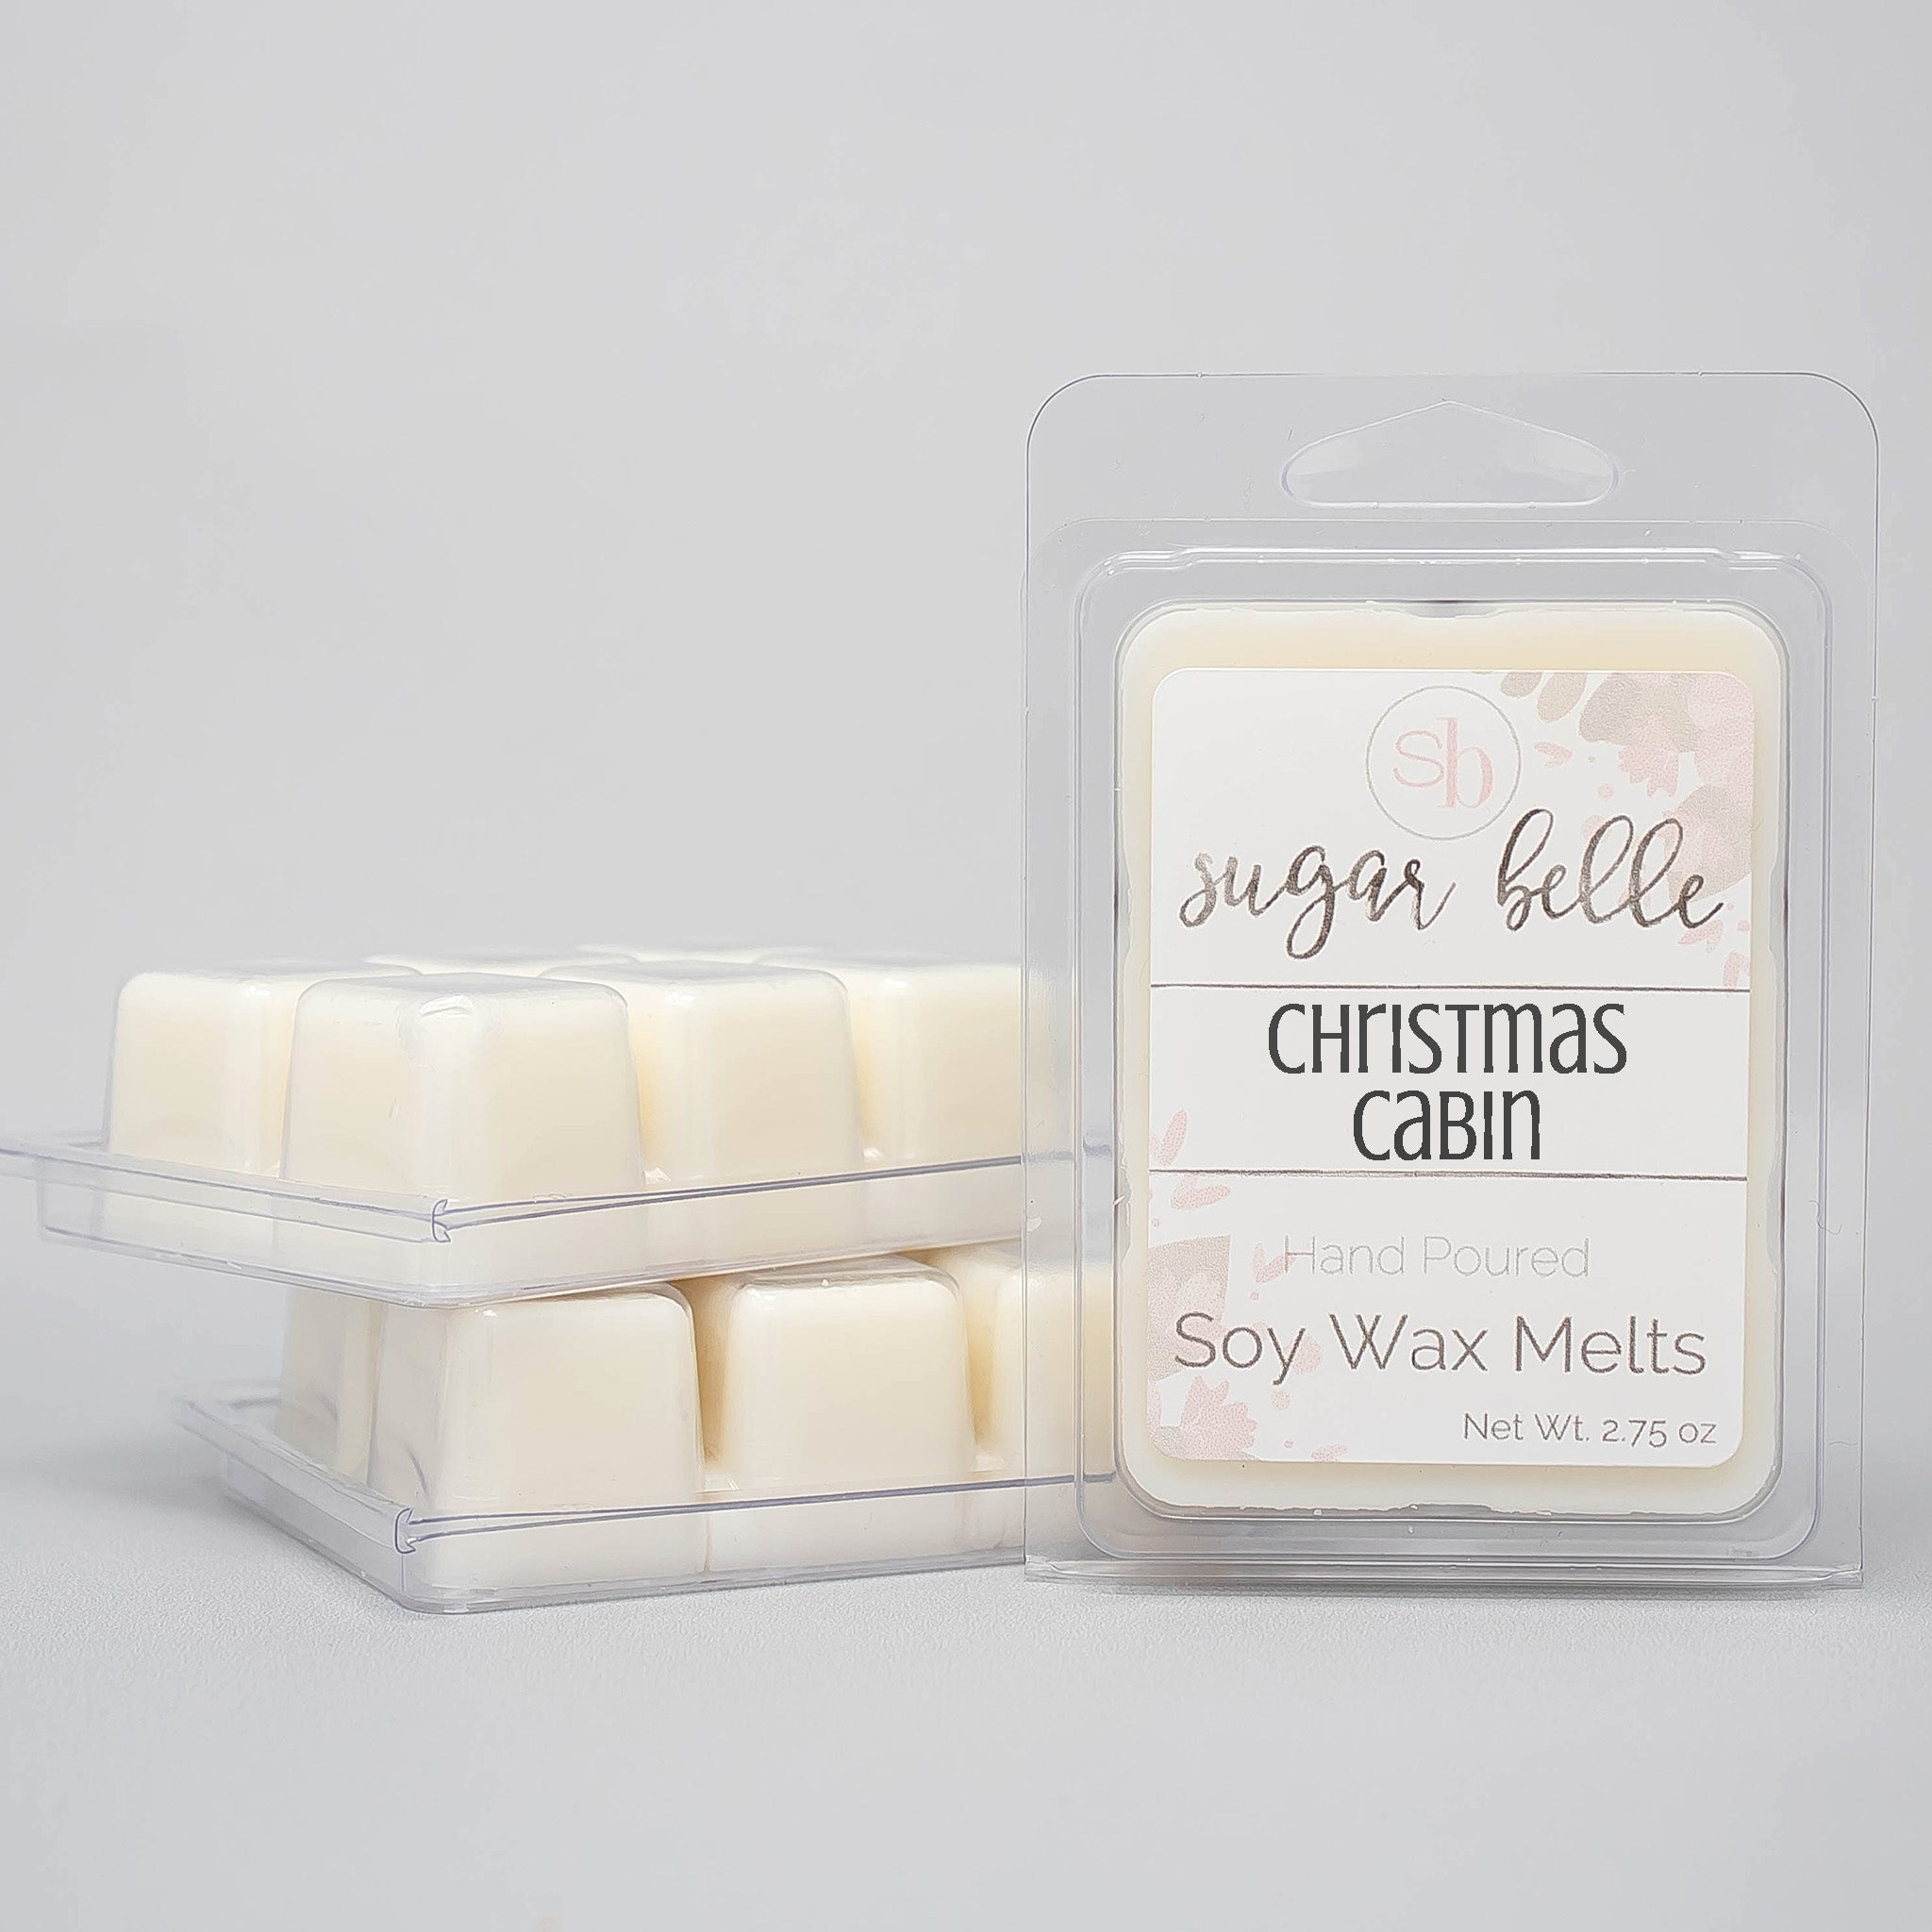 Christmas Cabin Scented Wax Cubes  Small Batch. Hand Poured. – Sugar Belle  Candles